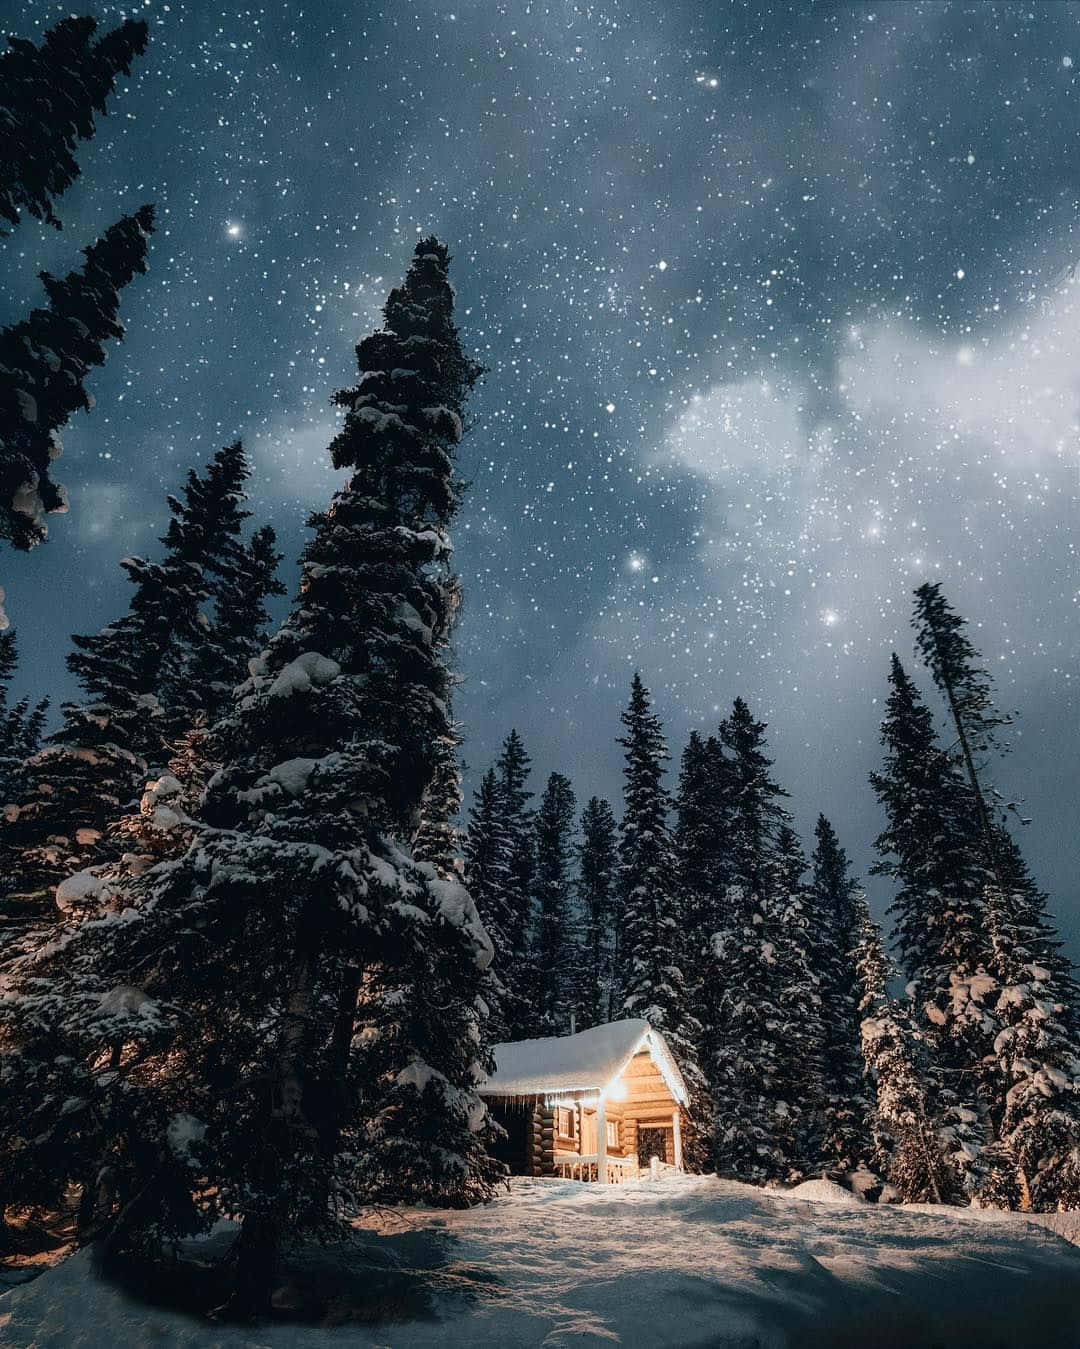 A Cozy Getaway with Your Iphone Wallpaper